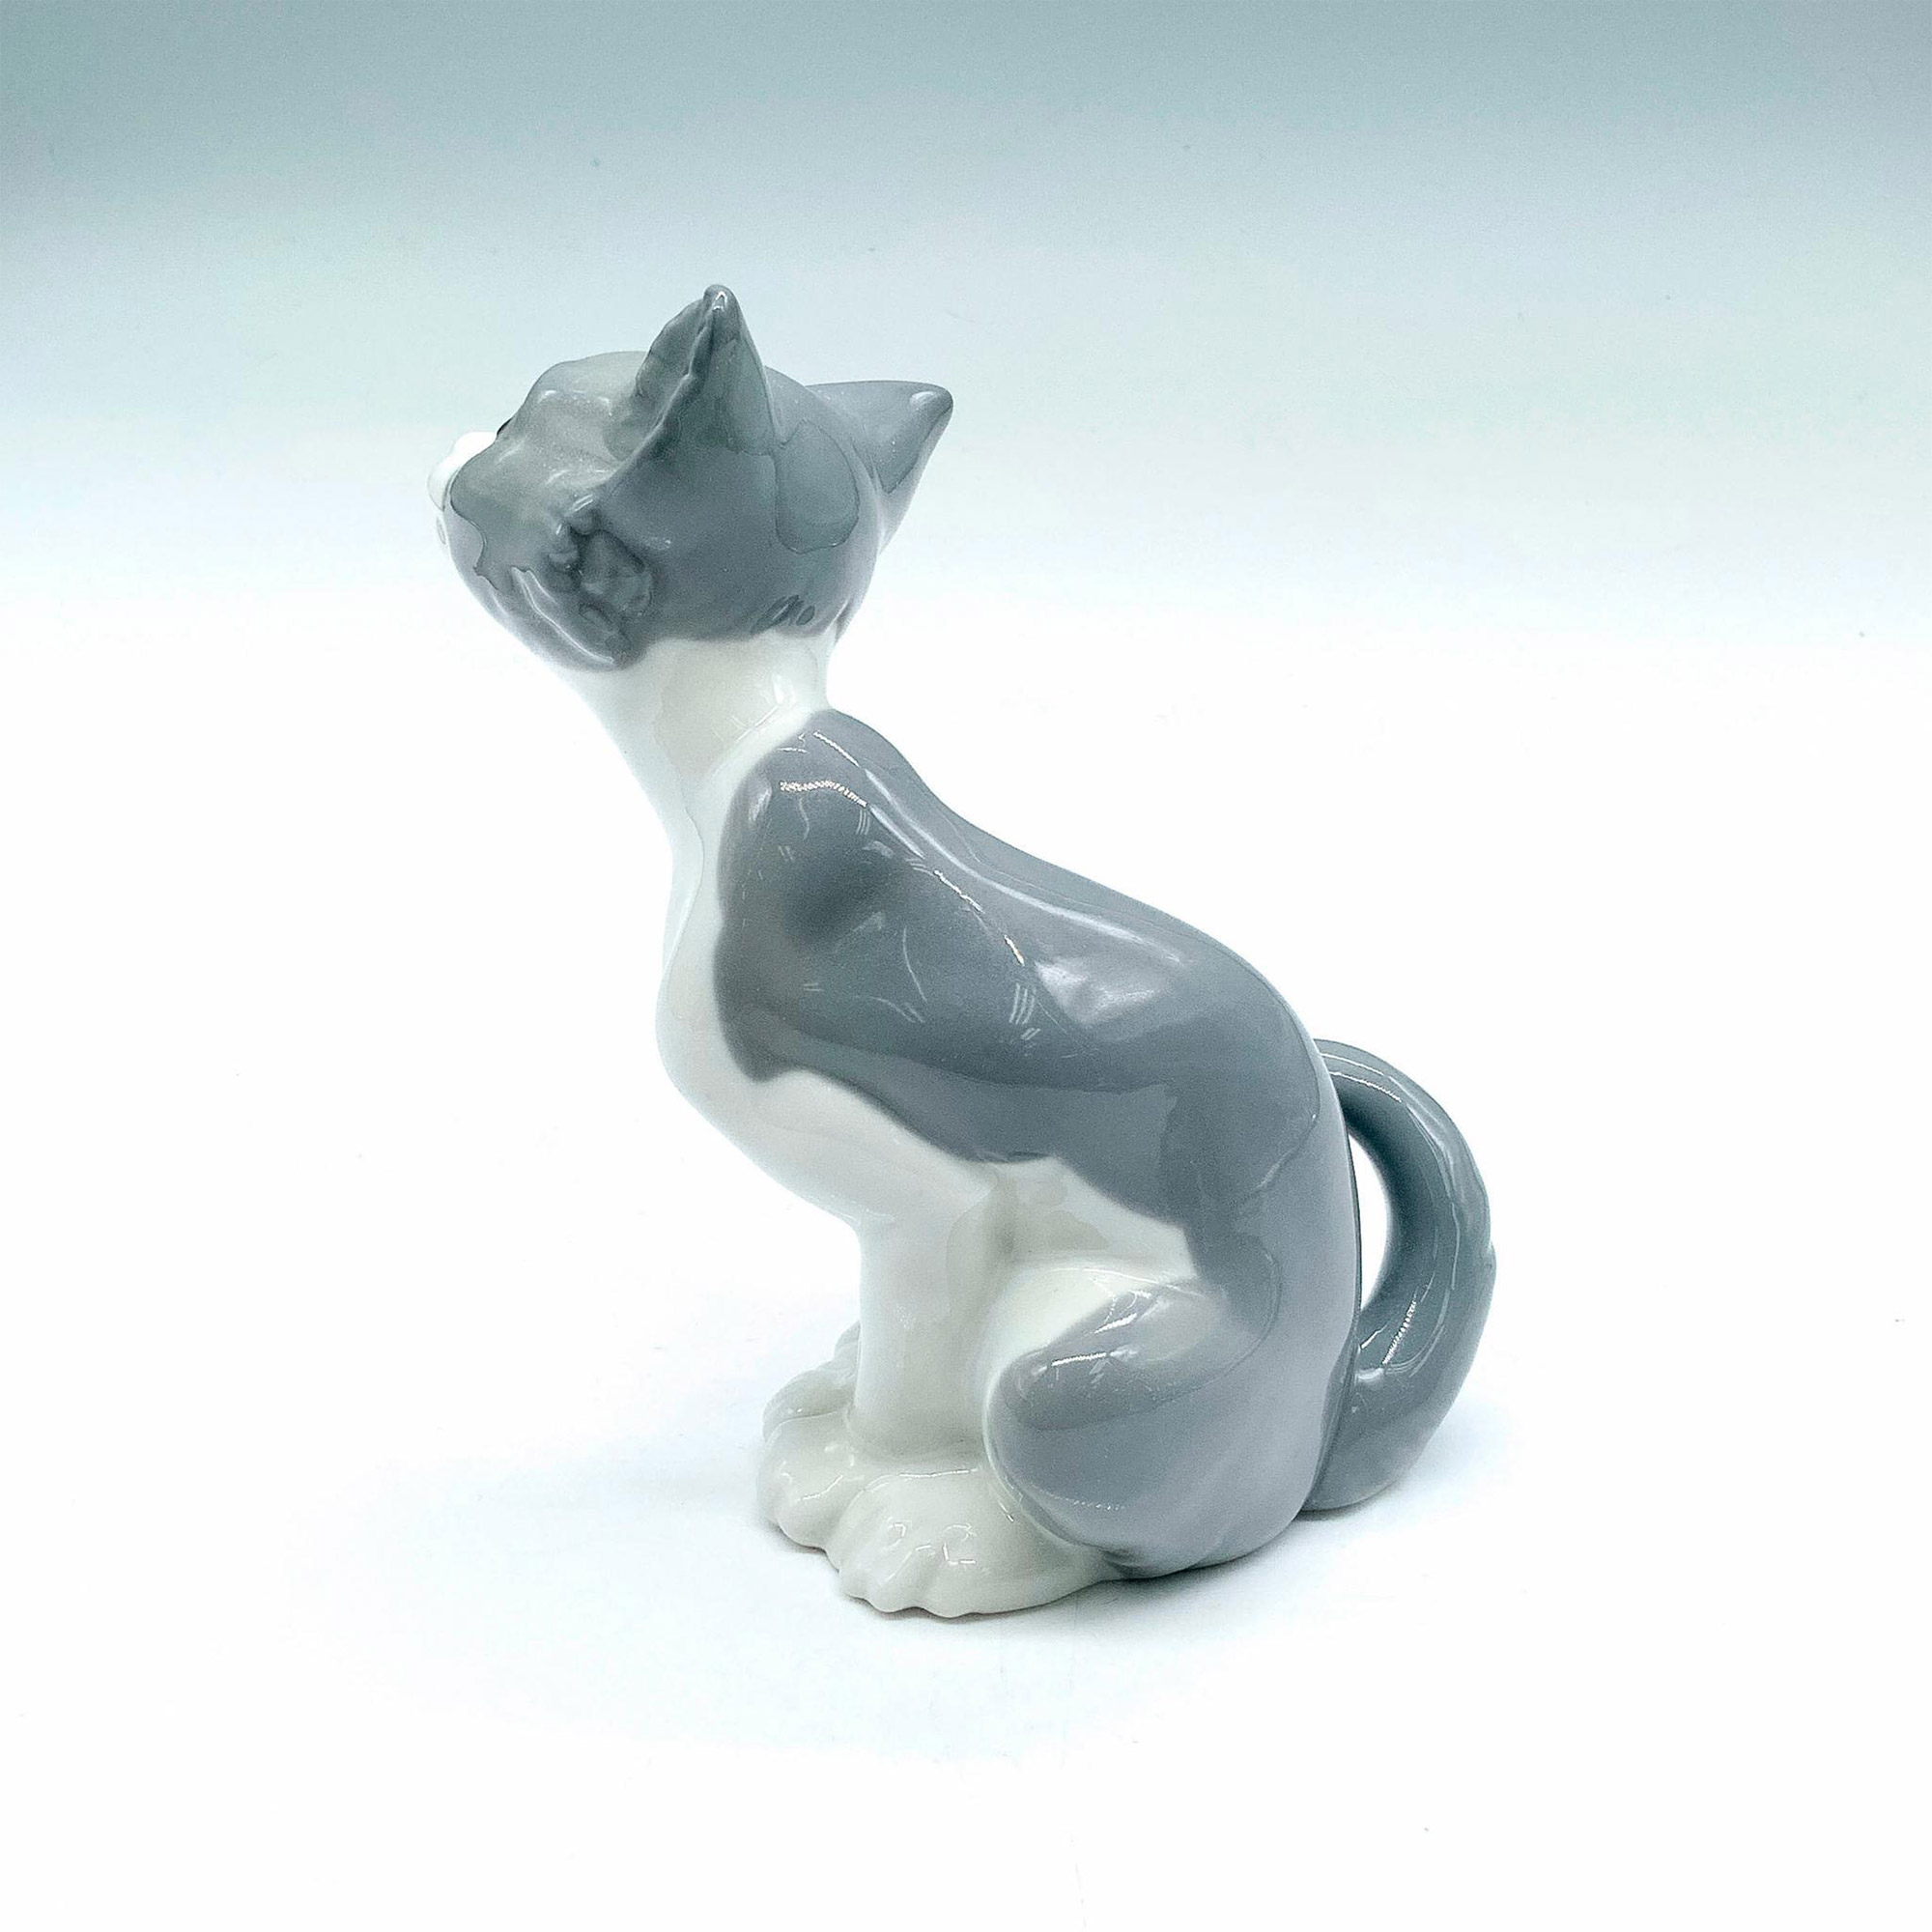 Feed Me Cat 5113 - Lladro Porcelain Figurine - Image 2 of 3